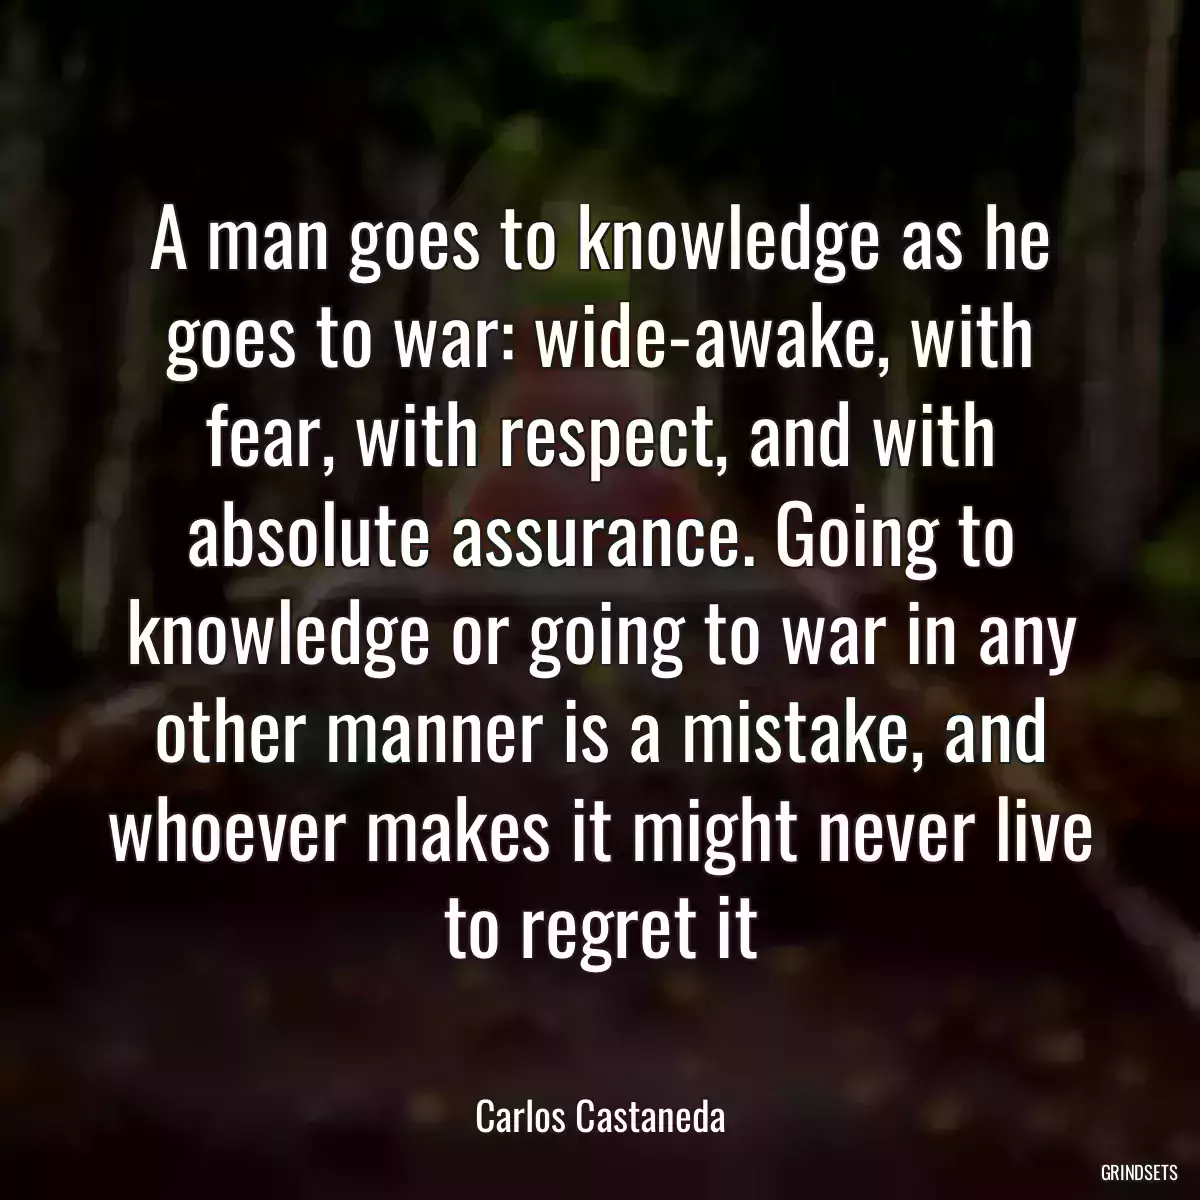 A man goes to knowledge as he goes to war: wide-awake, with fear, with respect, and with absolute assurance. Going to knowledge or going to war in any other manner is a mistake, and whoever makes it might never live to regret it